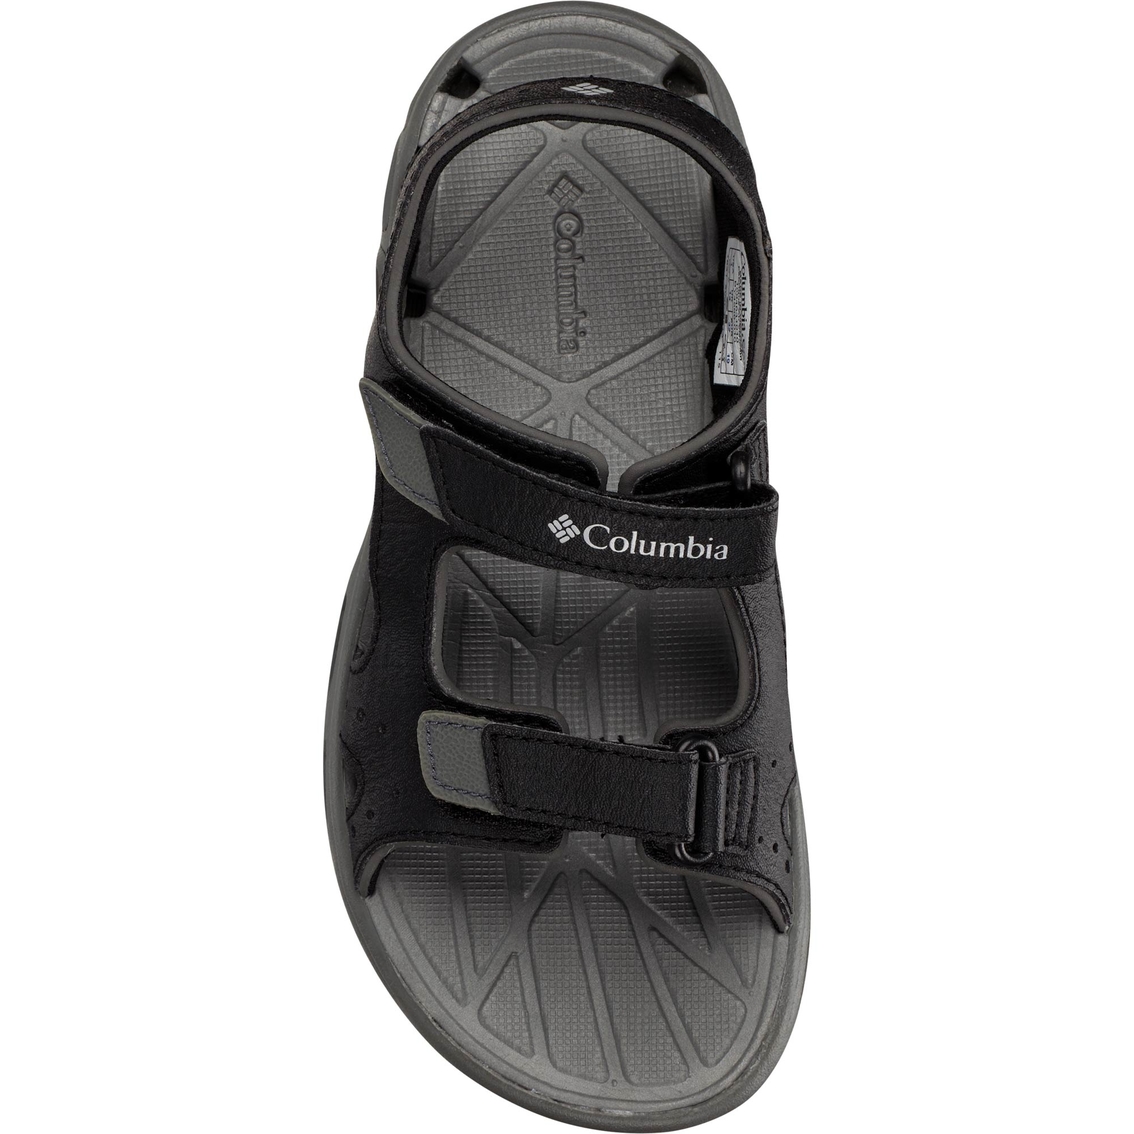 Columbia Youth Boys GS Techsun Vent Sandals - Image 5 of 6